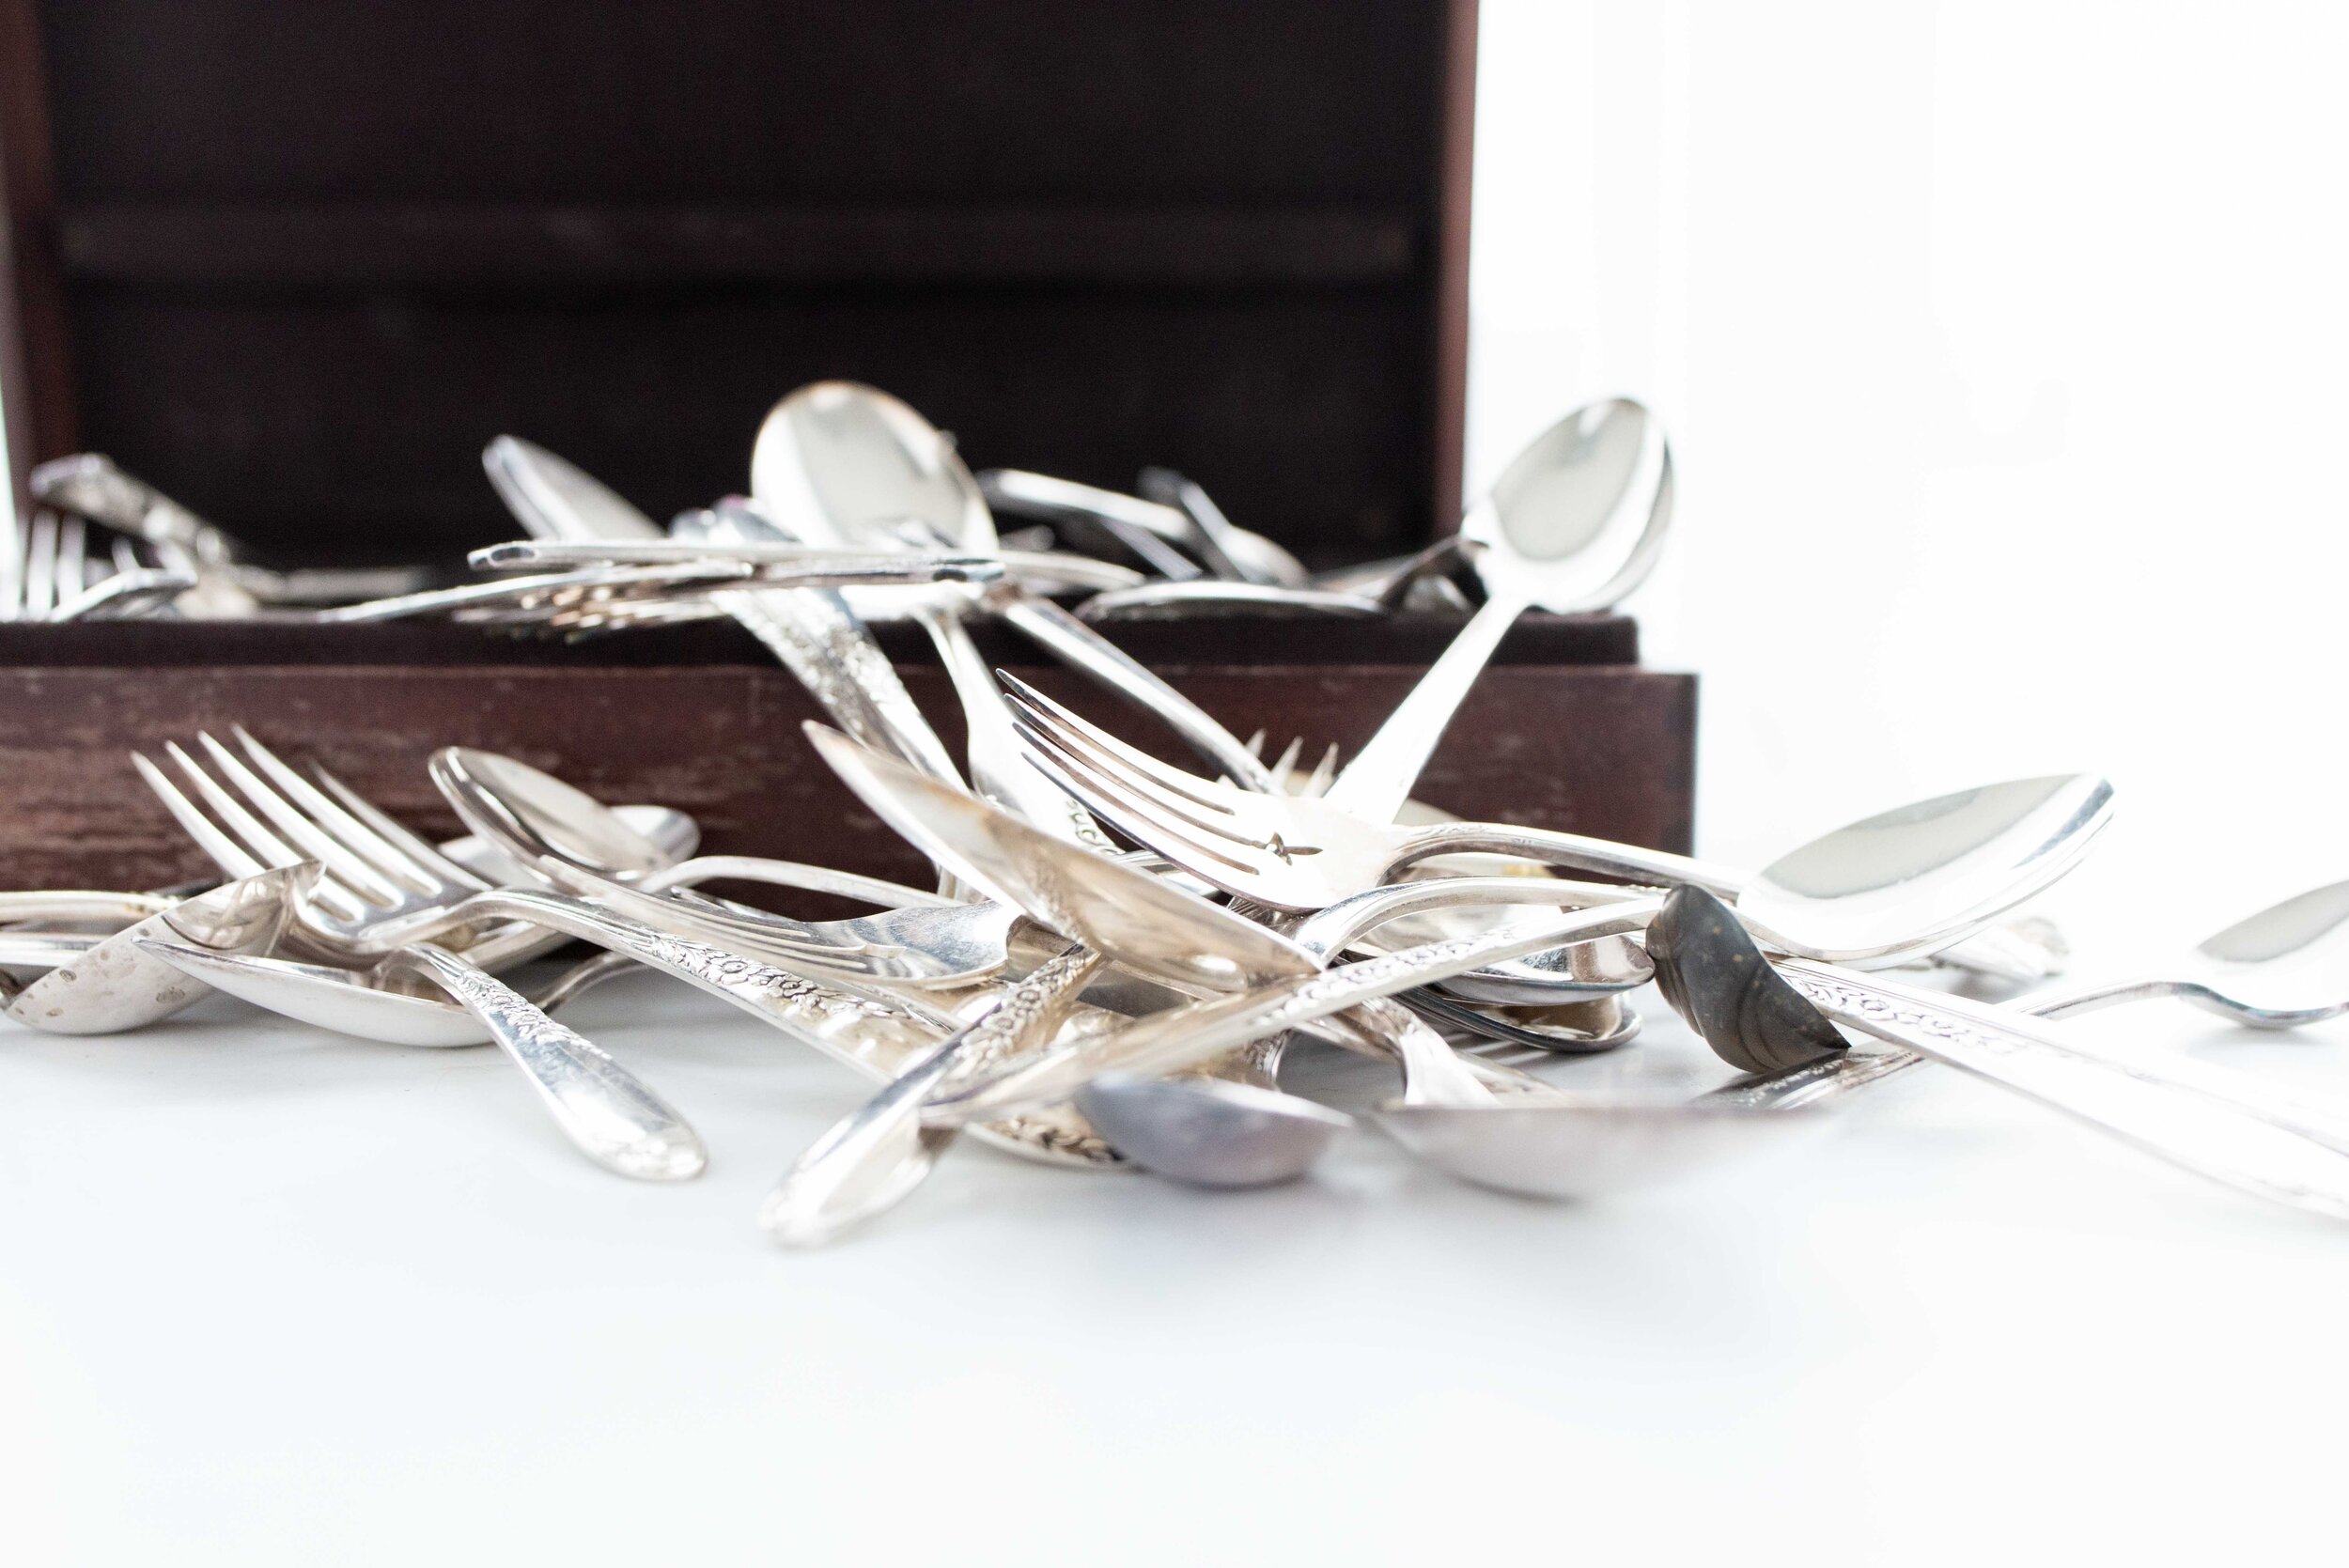 One of a Kind Vintage Silverware Jewelry